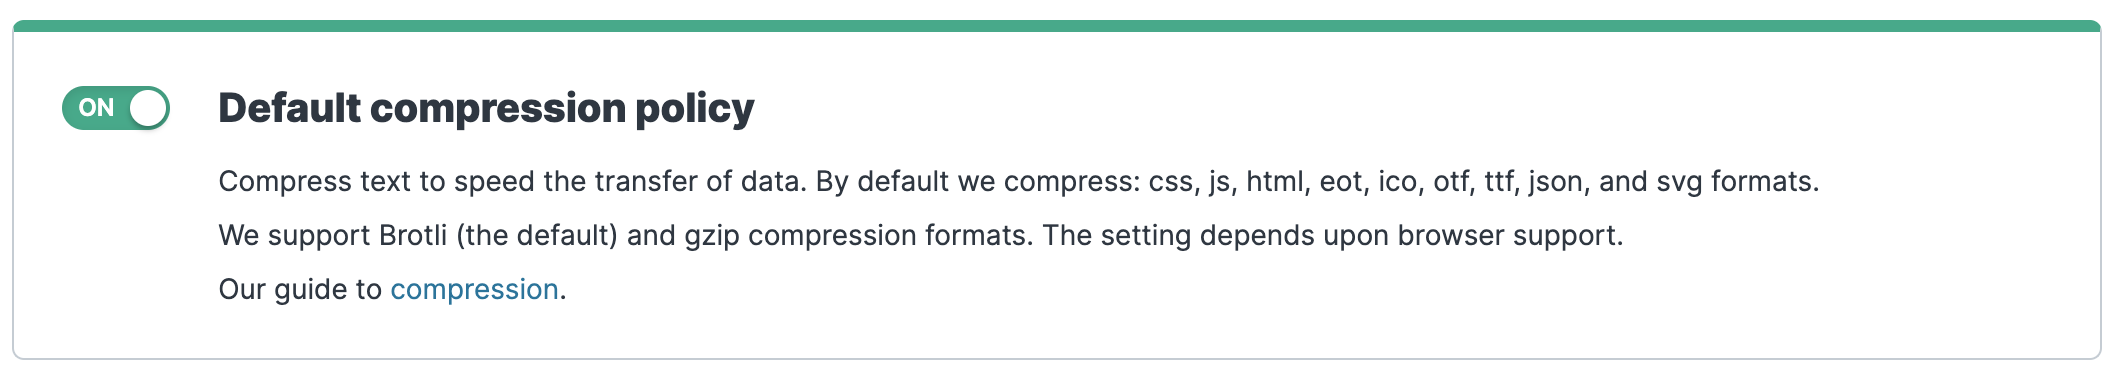 Enabling compression settings in the Fastly web interface